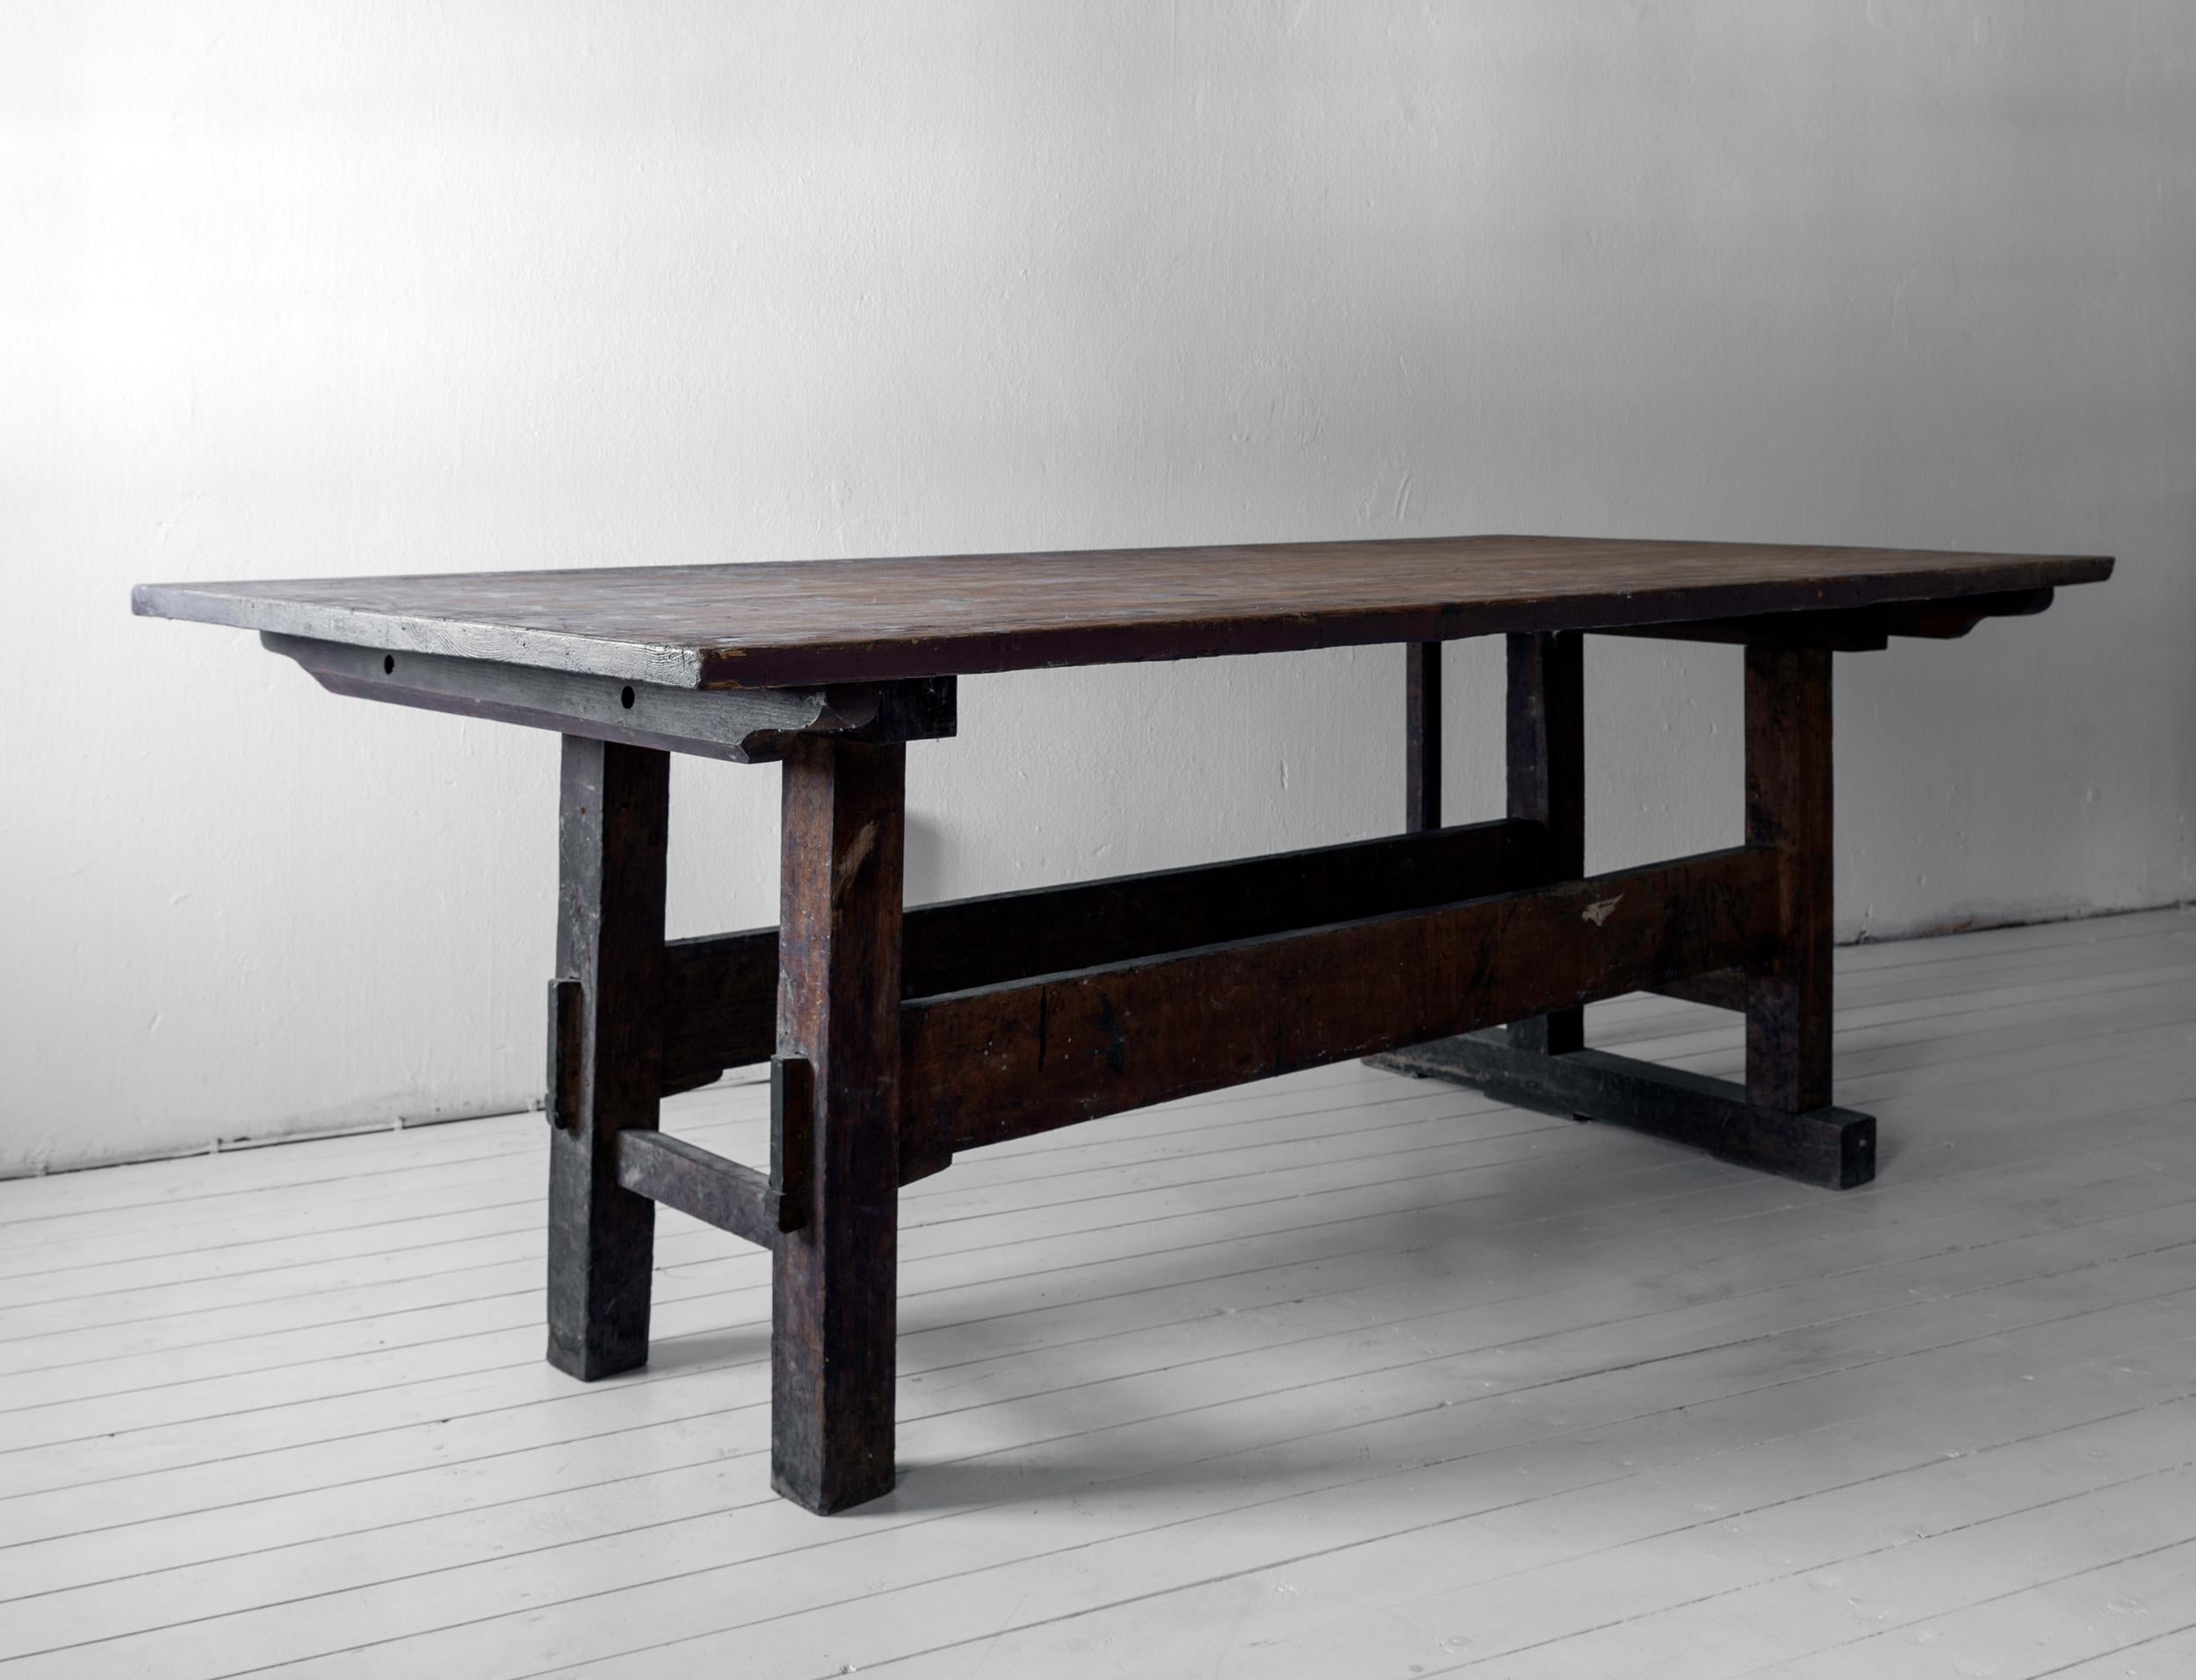 Minimal Wabi Sabi dining table or desk with remains of original paint, formerly possibly a work table. 

The top antique, but not original to the piece.